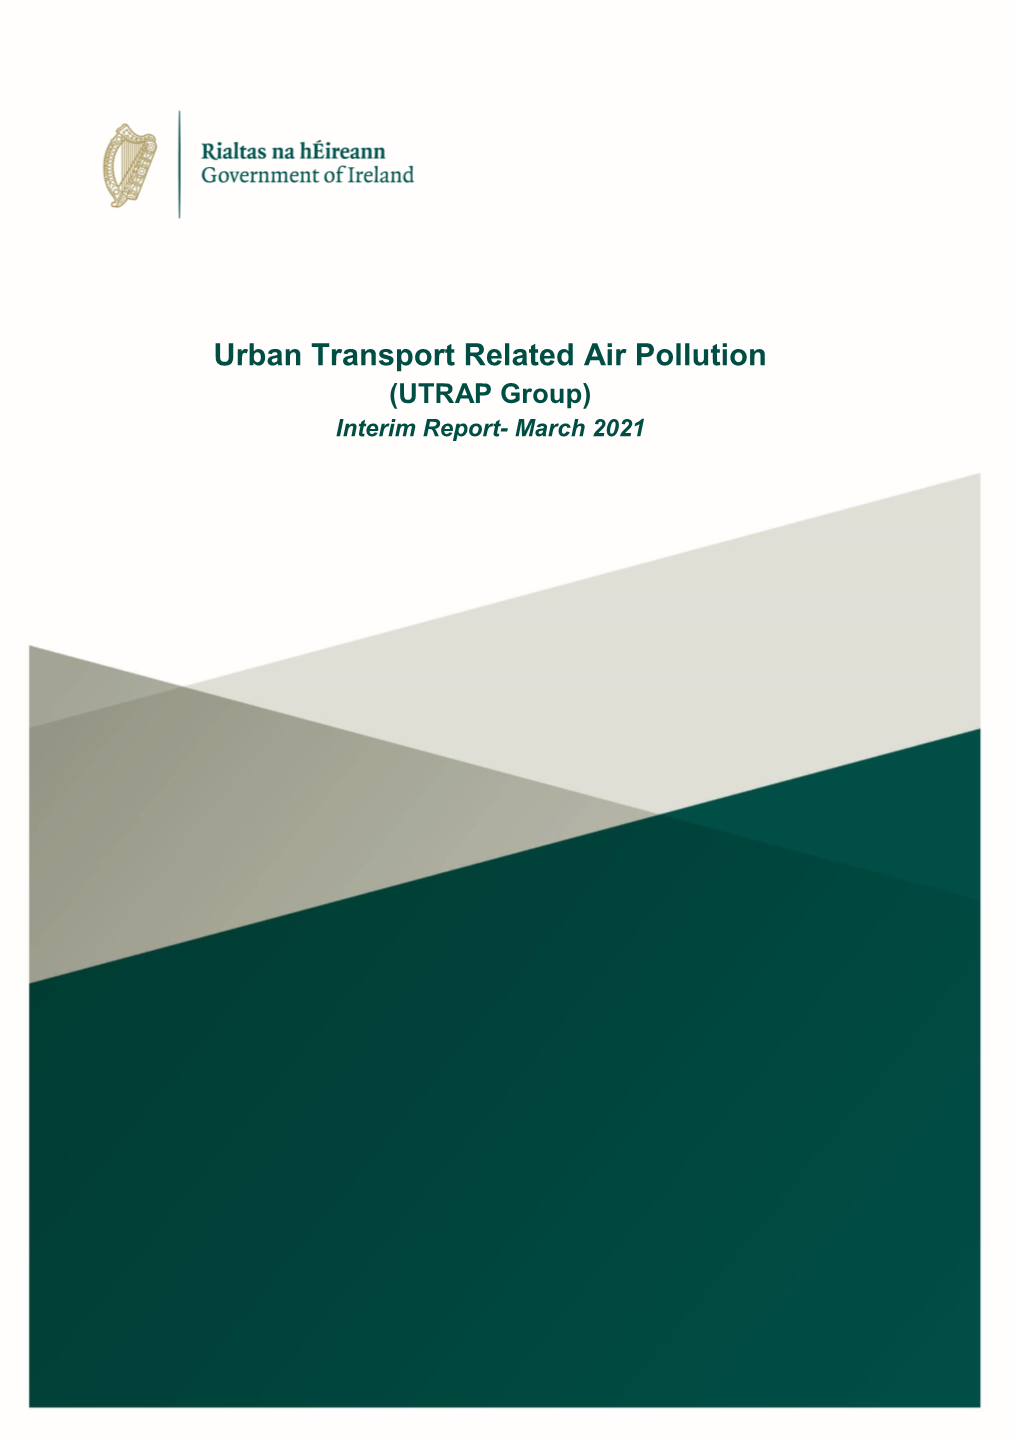 Urban Transport Related Air Pollution (UTRAP Group) Interim Report- March 2021